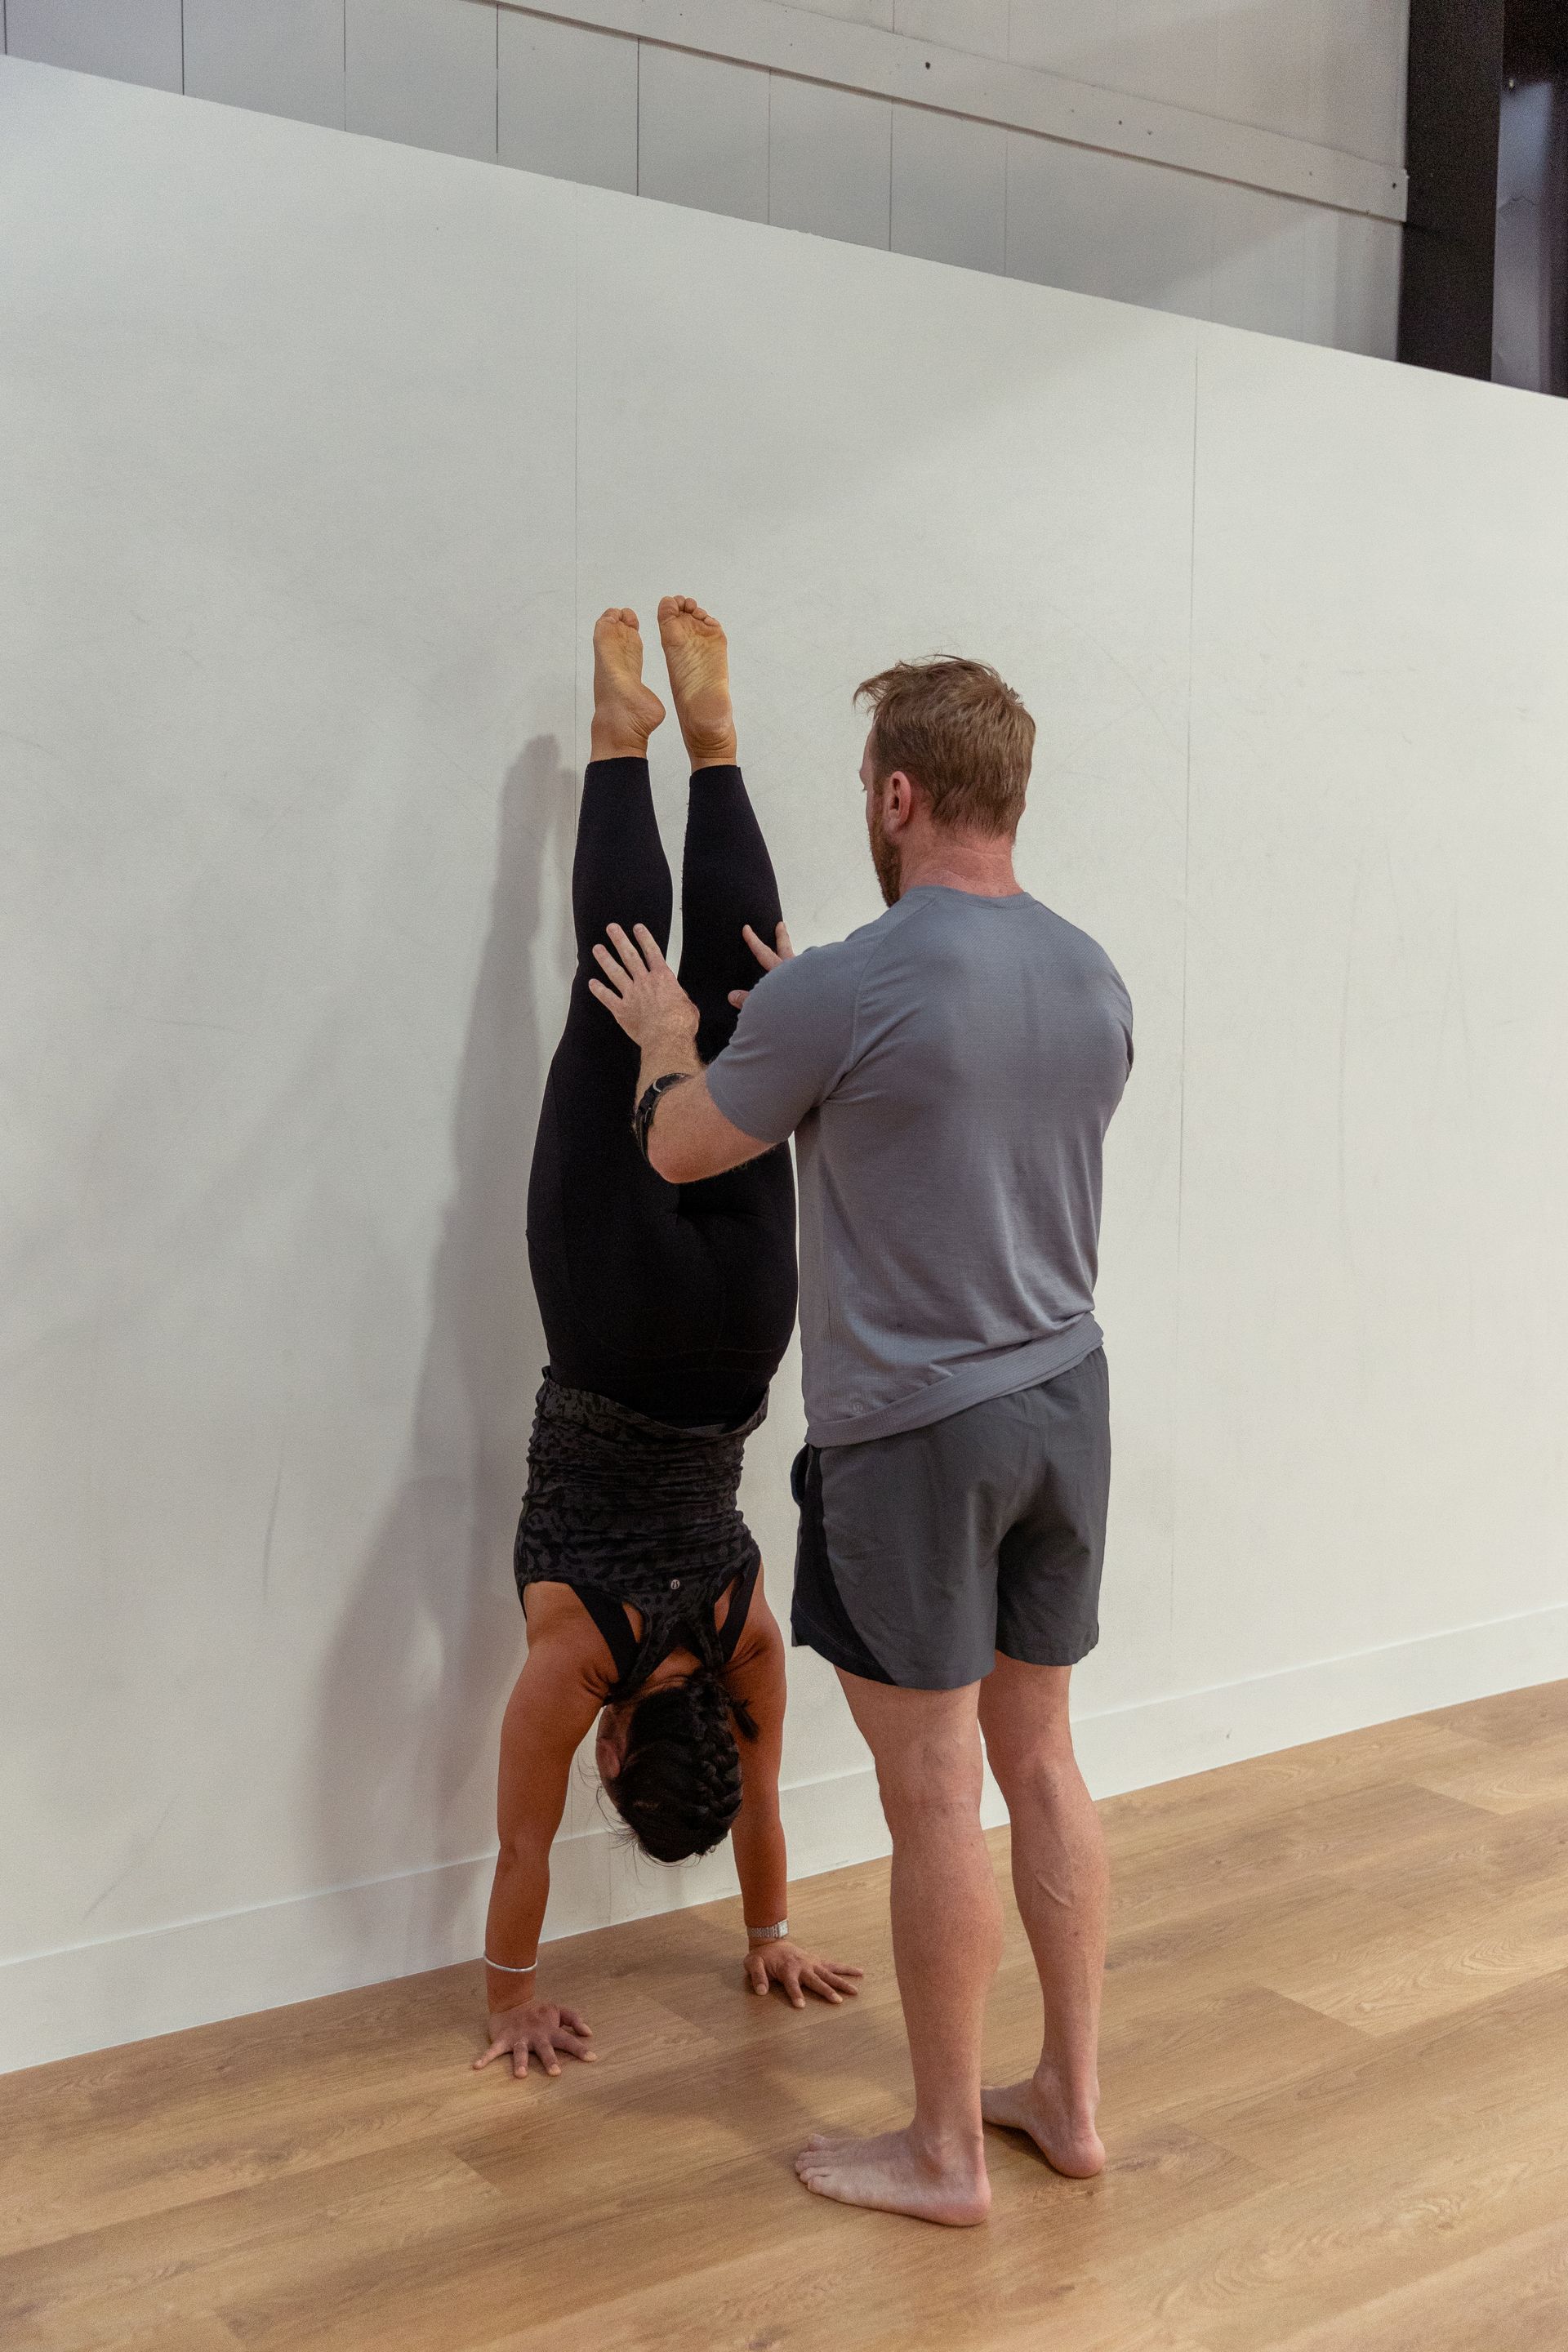 Image of a guy helping a woman in doing a handstand